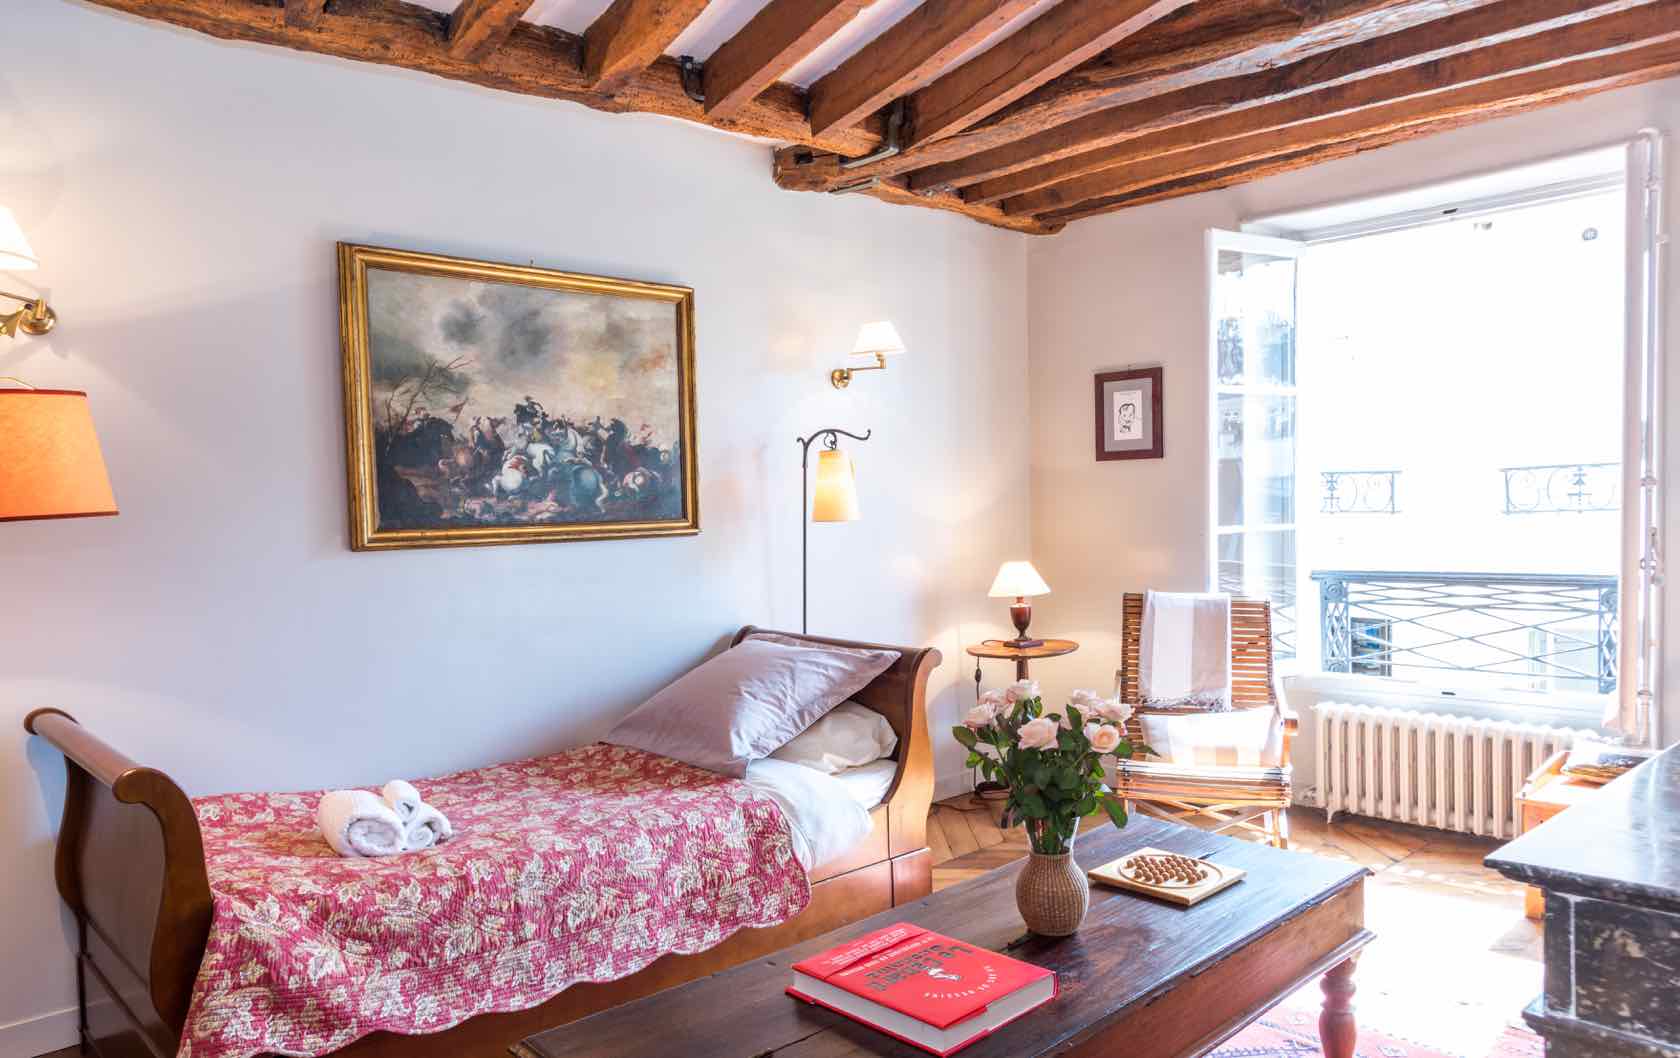 The Dolcetto Apartment - Old-World Comfort in Saint-Germain-des-Près